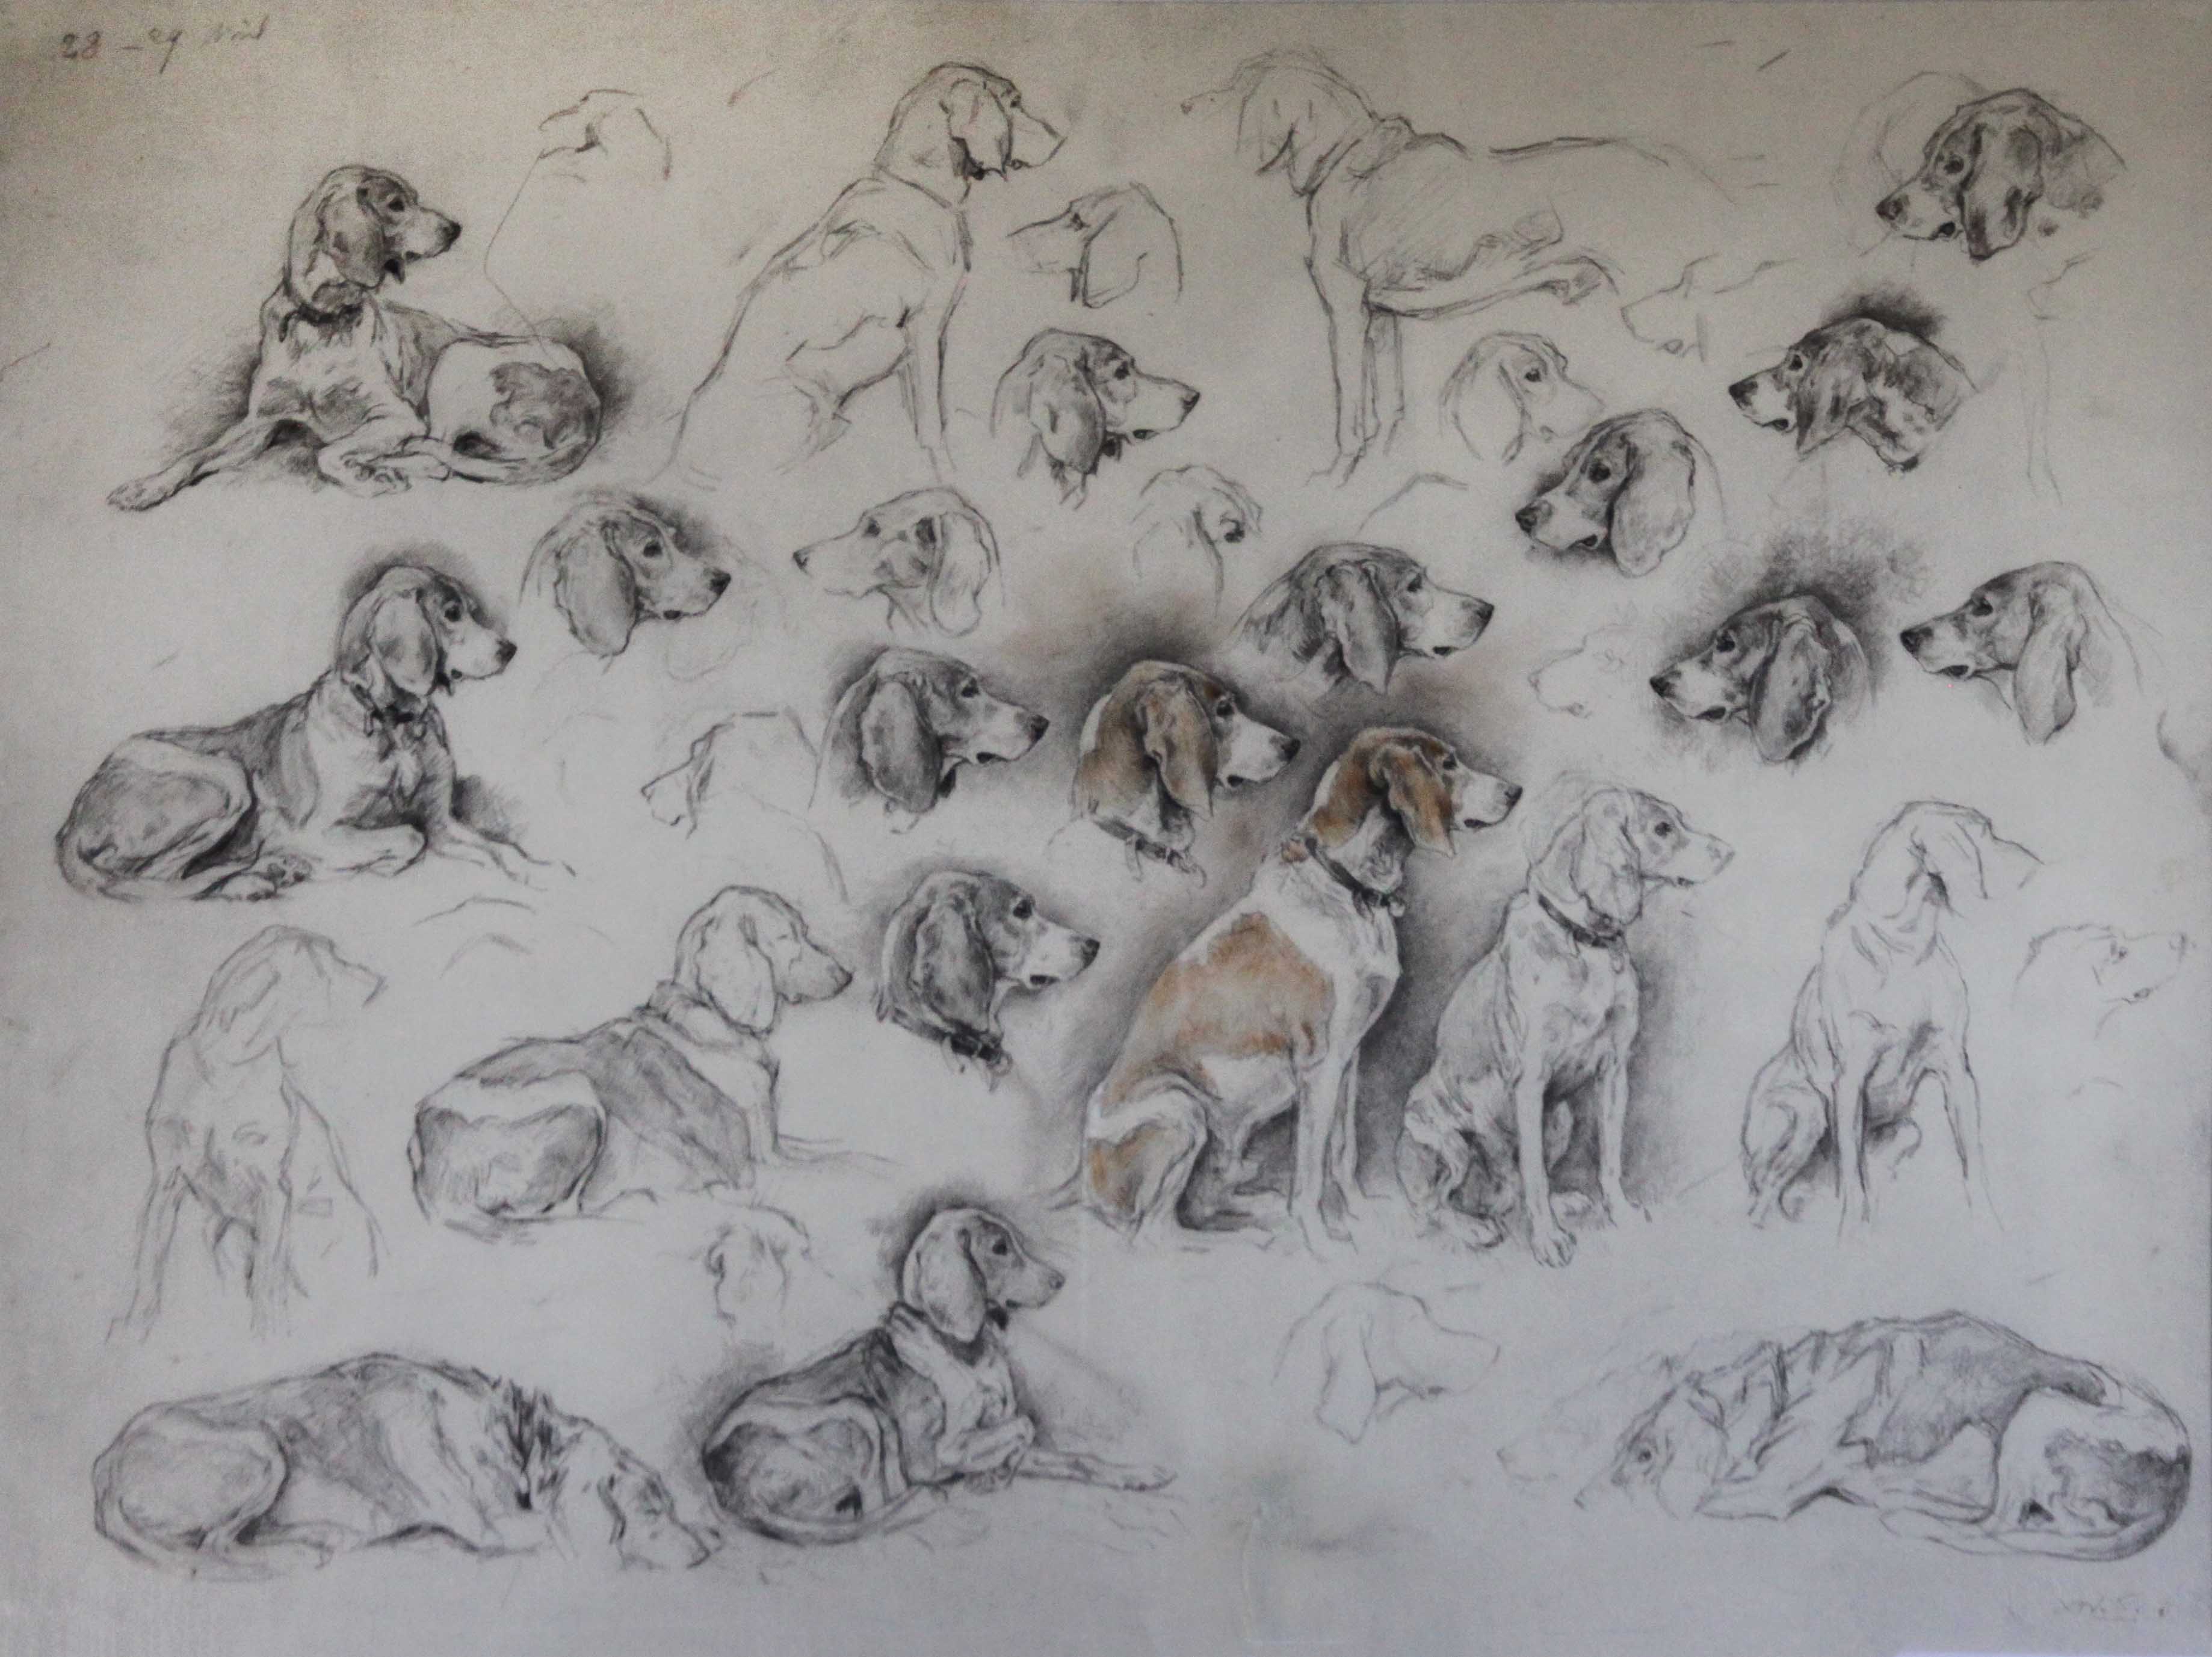 Click to see full size: “Chien de Meute”, French hunting hounds pencil with watercolour drawing by Xavier de Poret (French, 1894 - 1975)